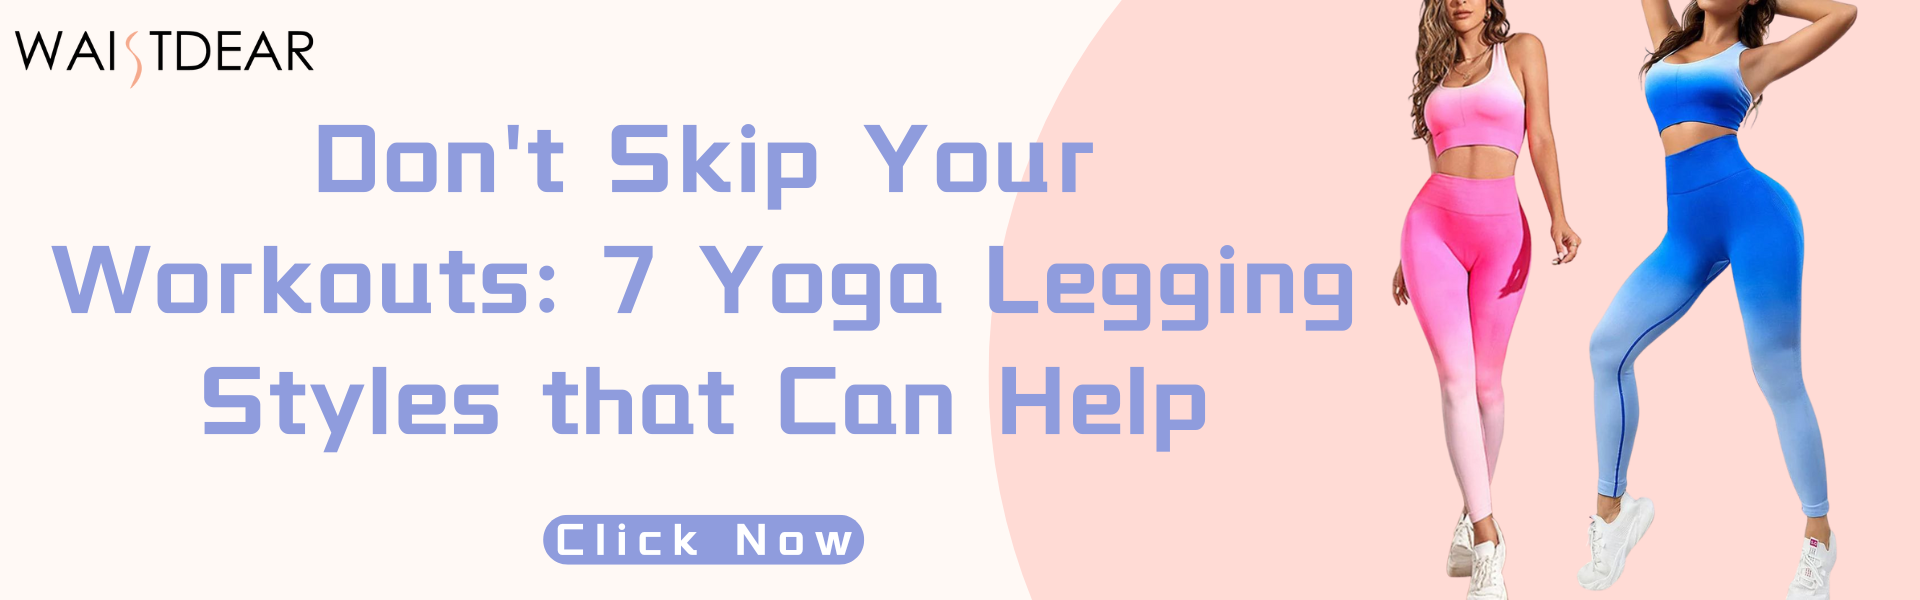 Don't Skip Your Workouts: 7 Yoga Legging Styles that Can Help